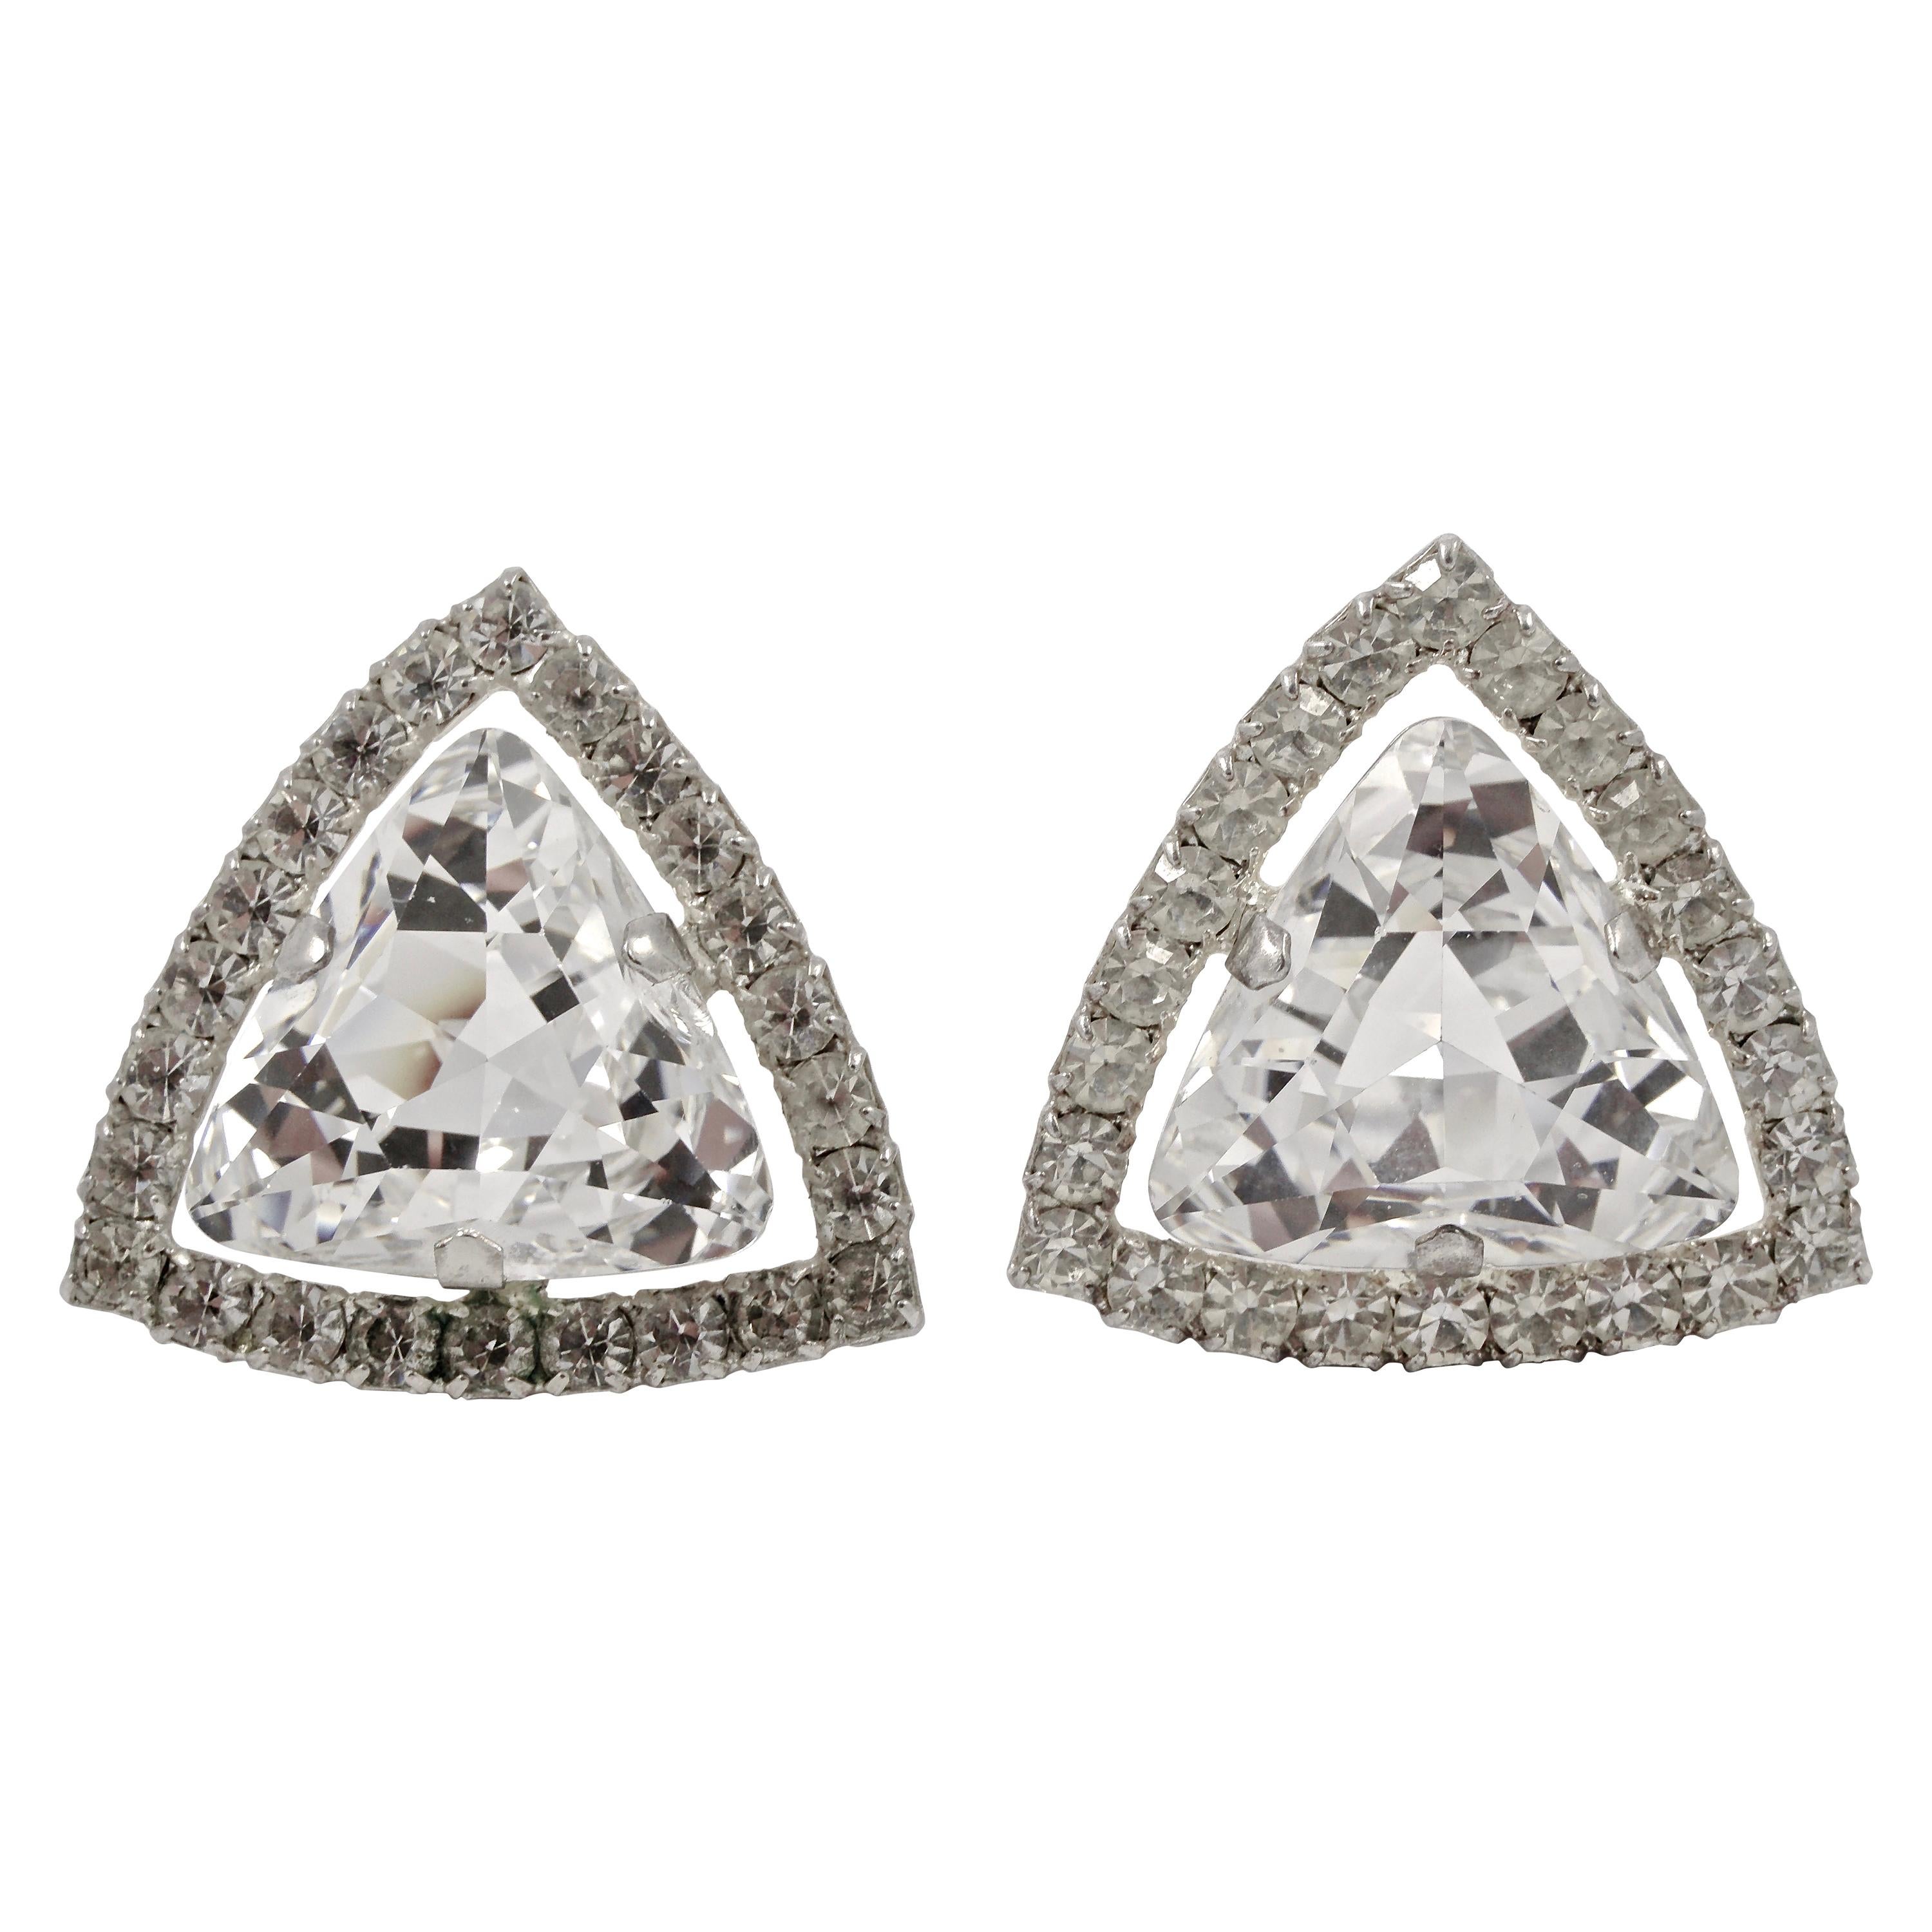 Large Silver Tone and Clear Rhinestone Clip On Statement Earrings circa 1960s